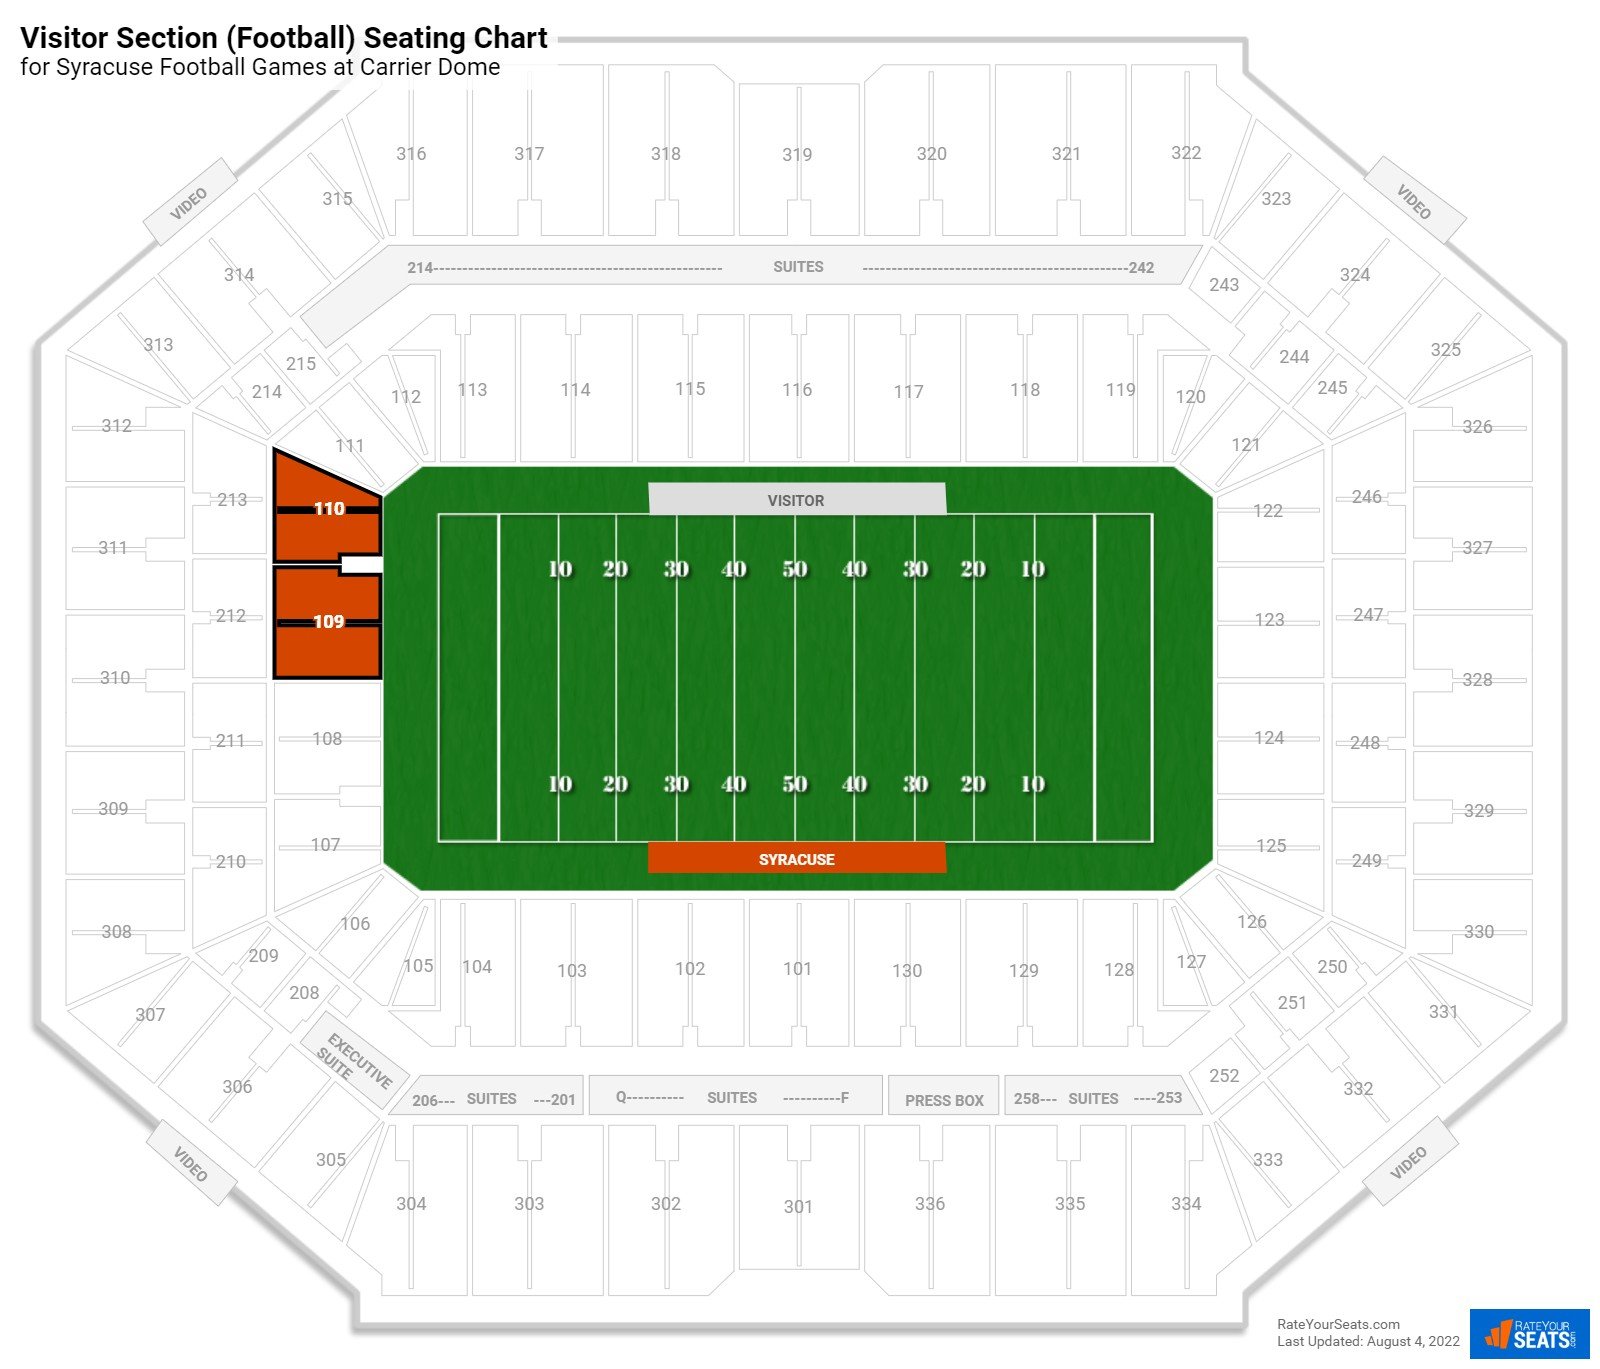 Syracuse Visitor Section (Football) Seating Chart at Carrier Dome